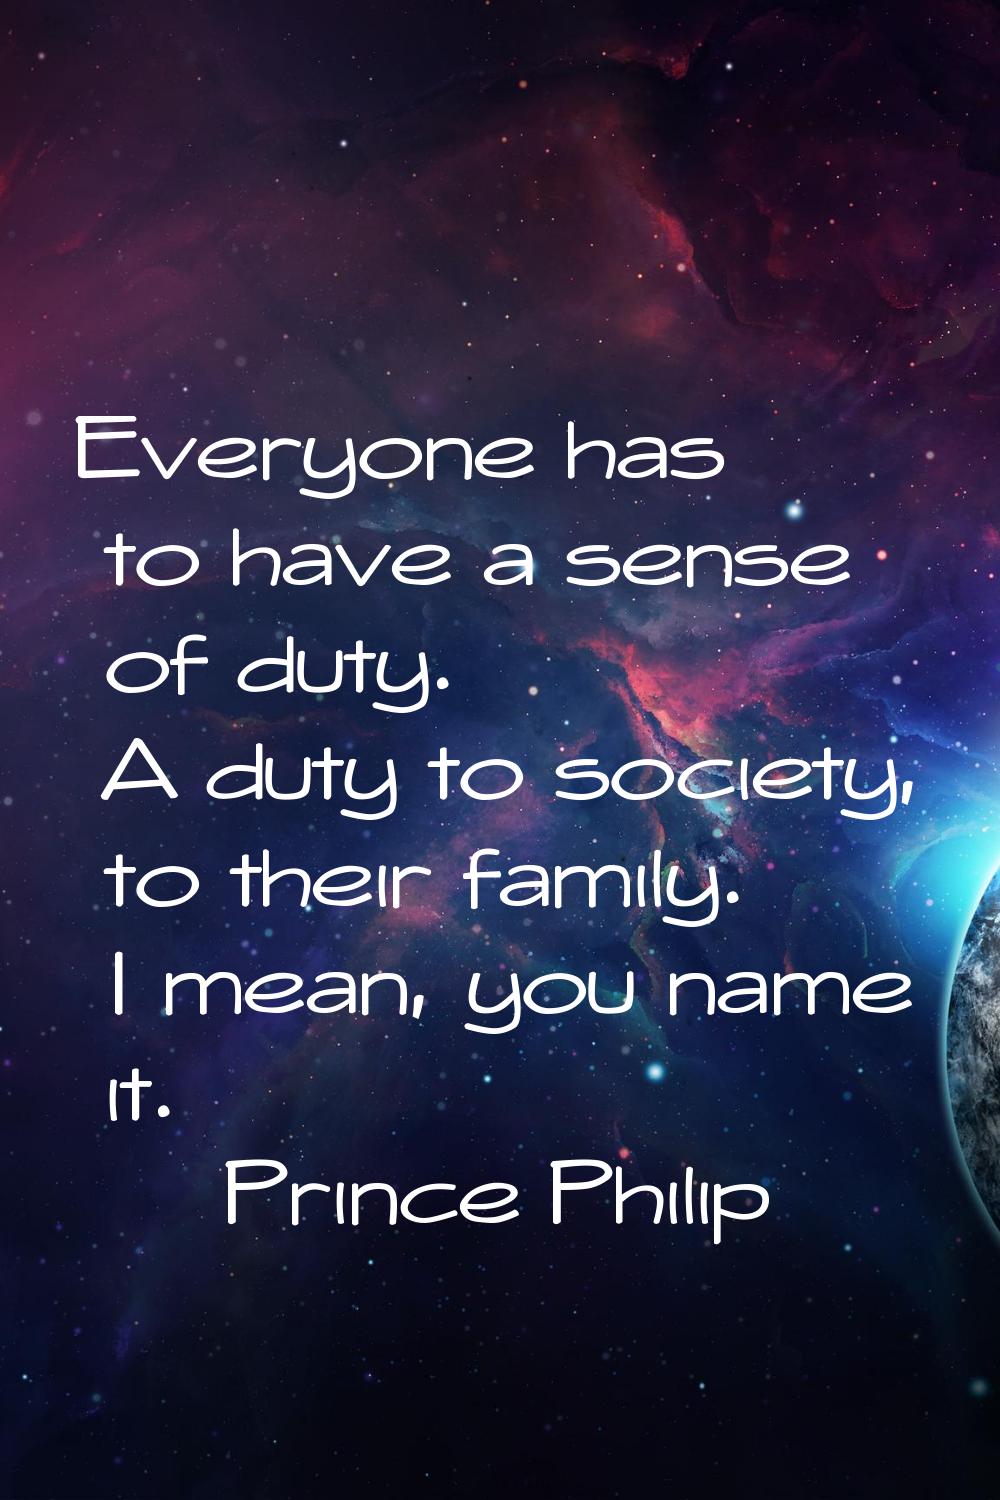 Everyone has to have a sense of duty. A duty to society, to their family. I mean, you name it.